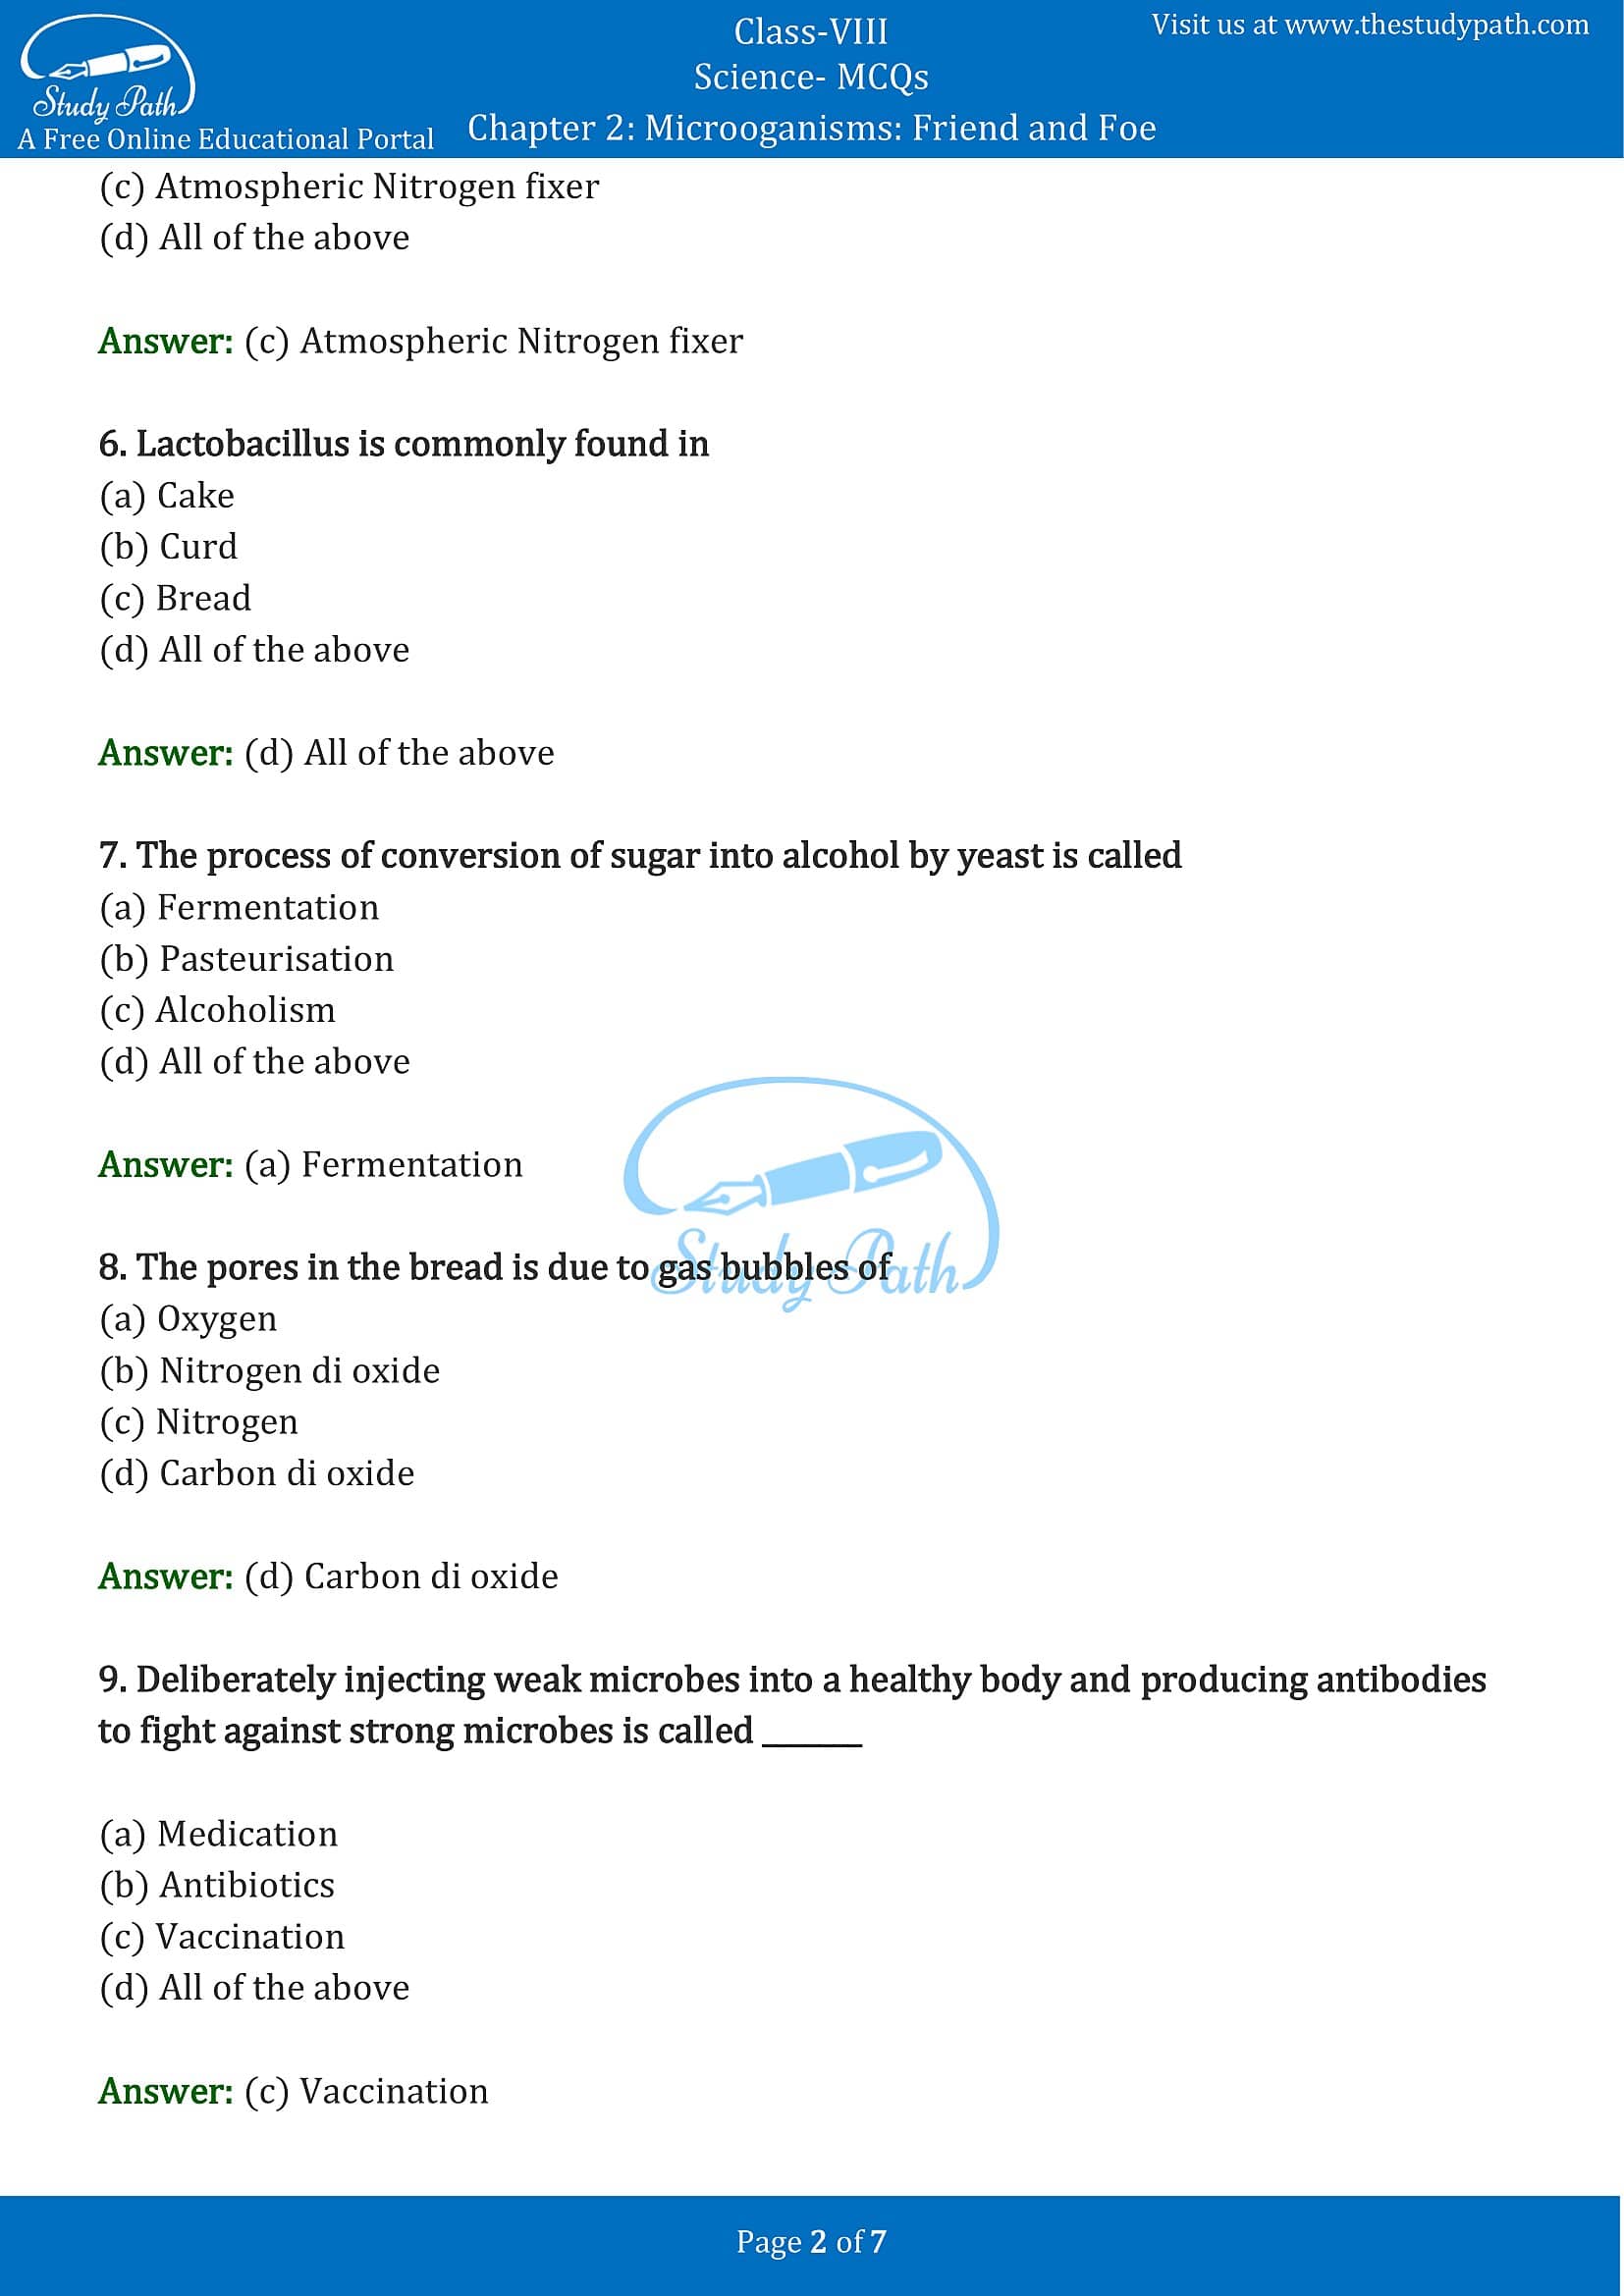 MCQ Questions for Class 8 Science Chapter 2 Microoganisms Friend and Foe with Answers PDF -2